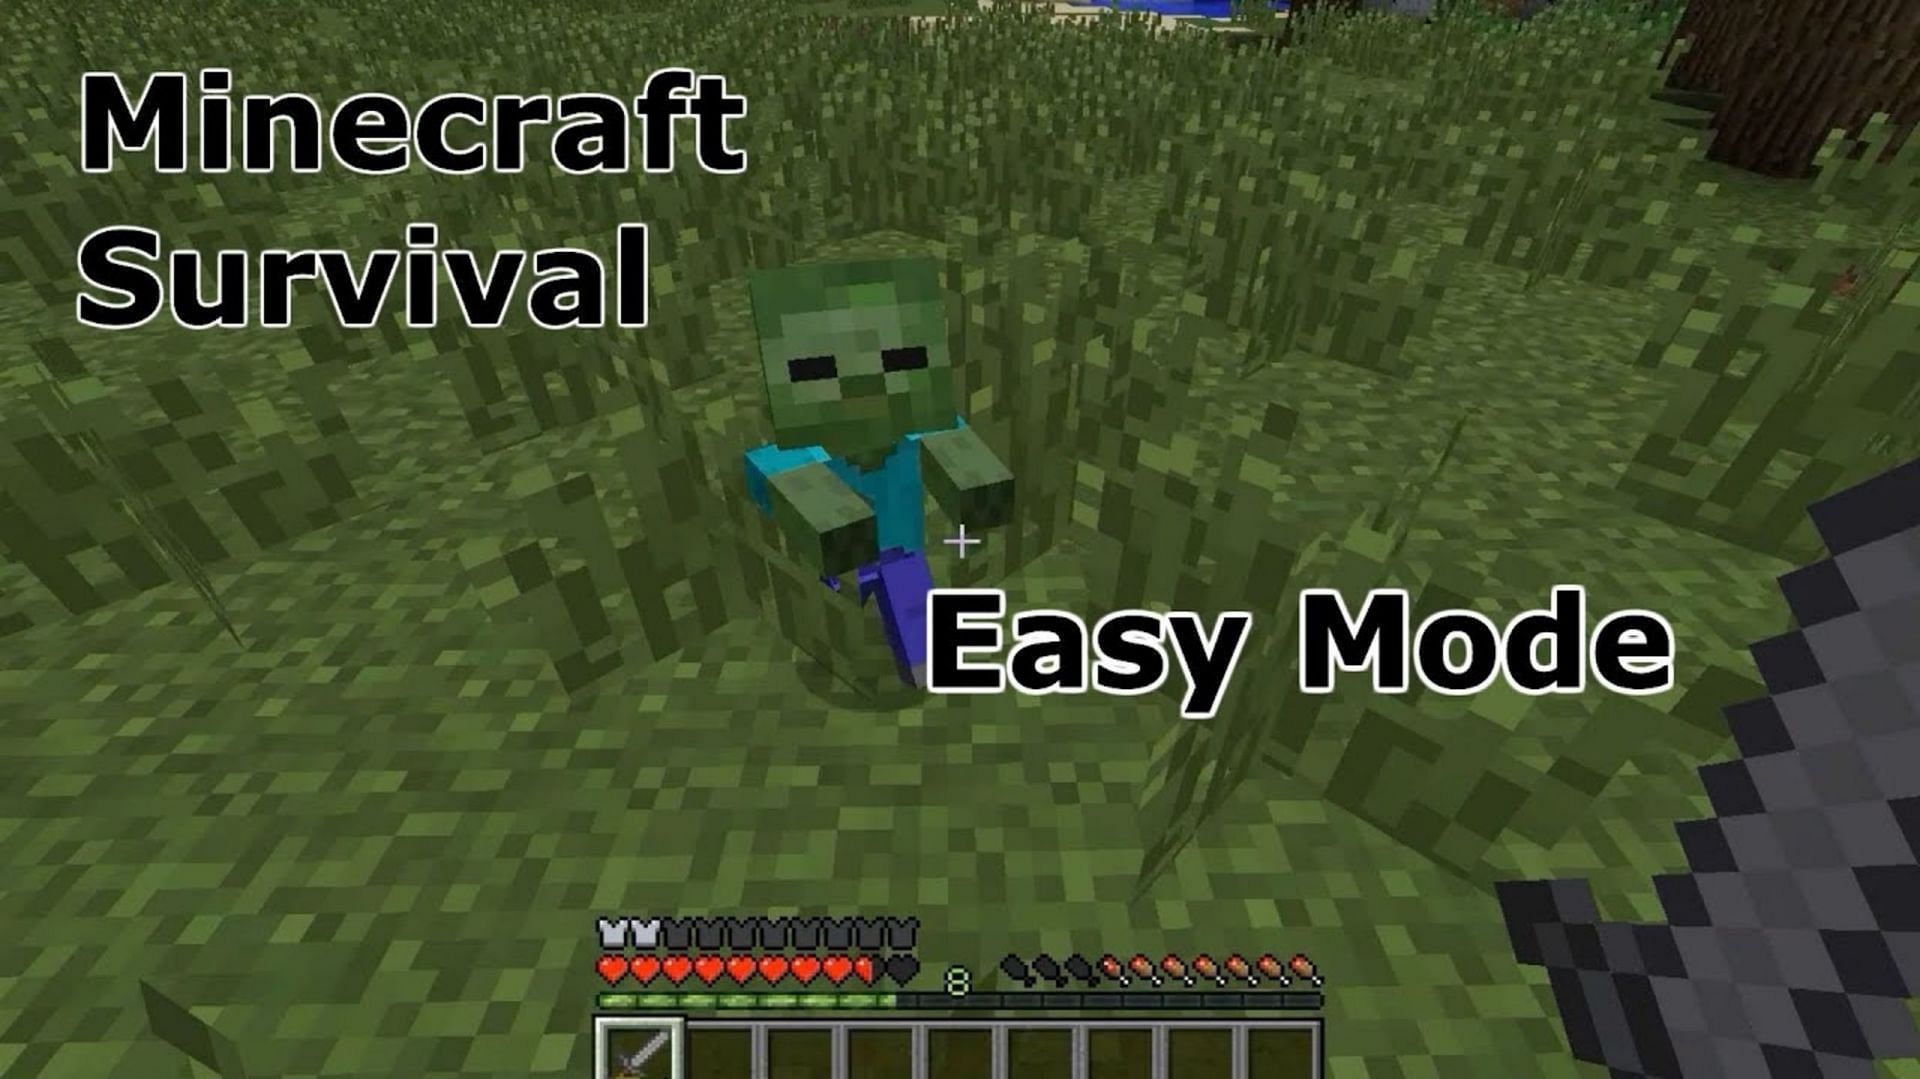 Easy Mode brings danger, but it should be easily dealt with (Image via Nora Cream/Youtube)